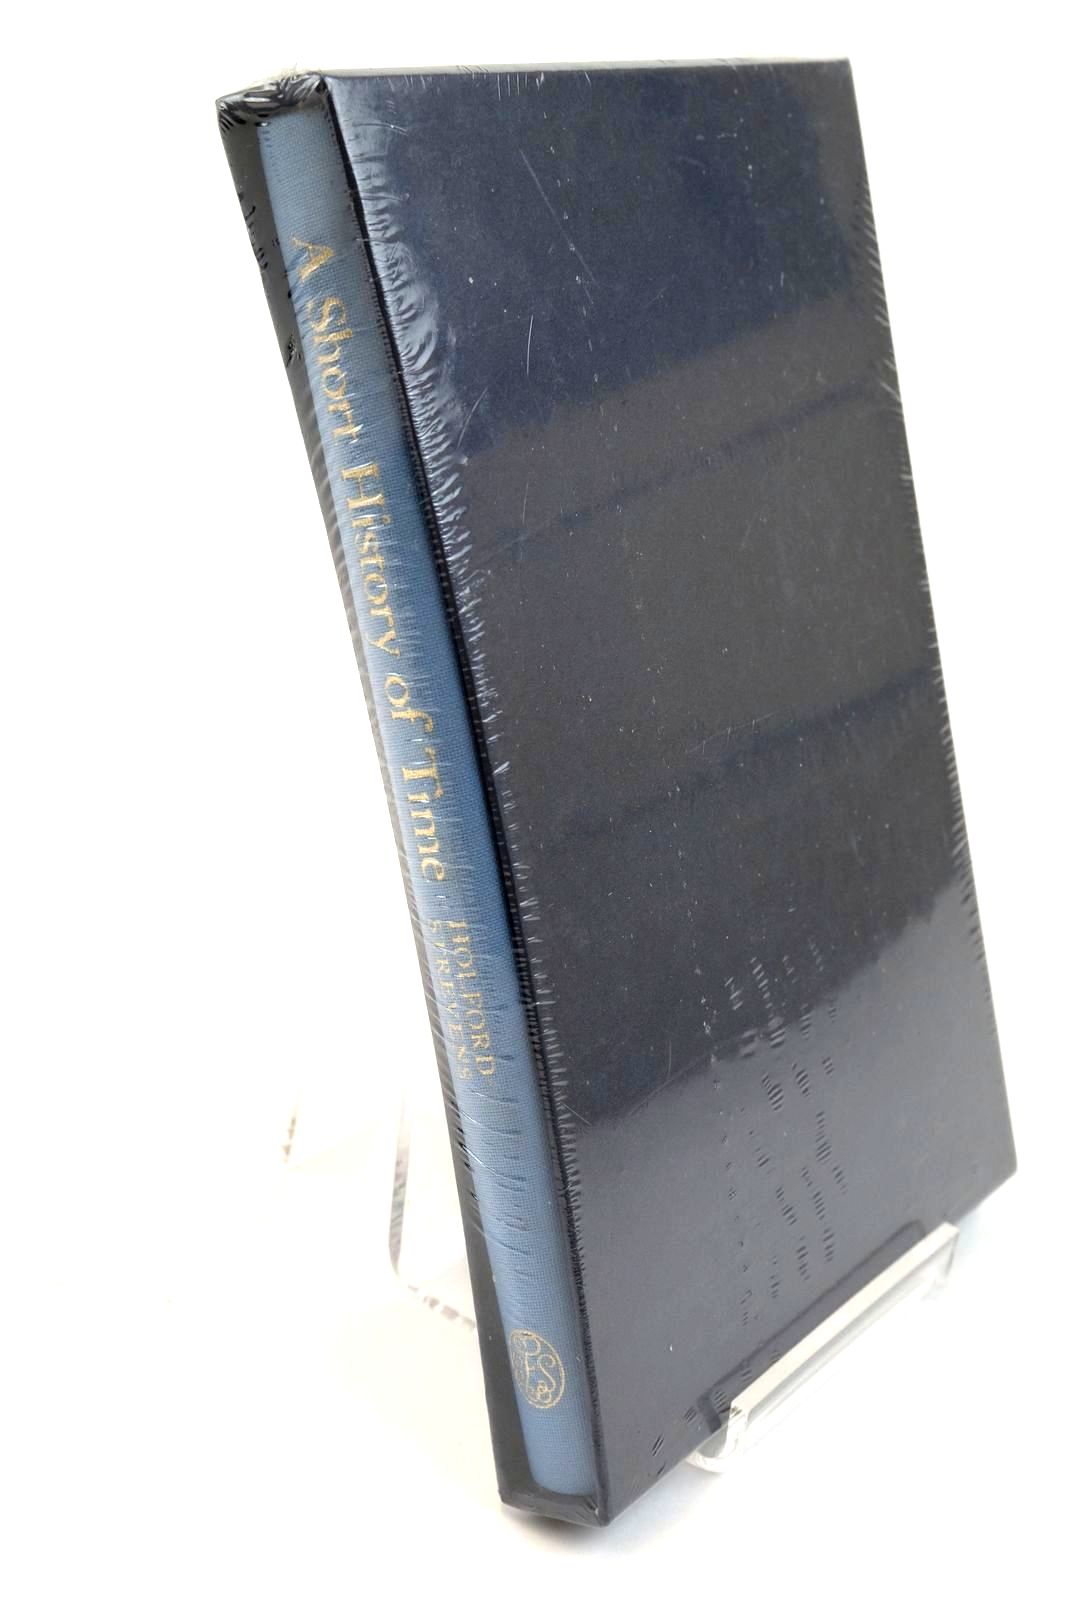 Photo of A SHORT HISTORY OF TIME written by Holford-Strevens, Leofranc published by Folio Society (STOCK CODE: 1321703)  for sale by Stella & Rose's Books